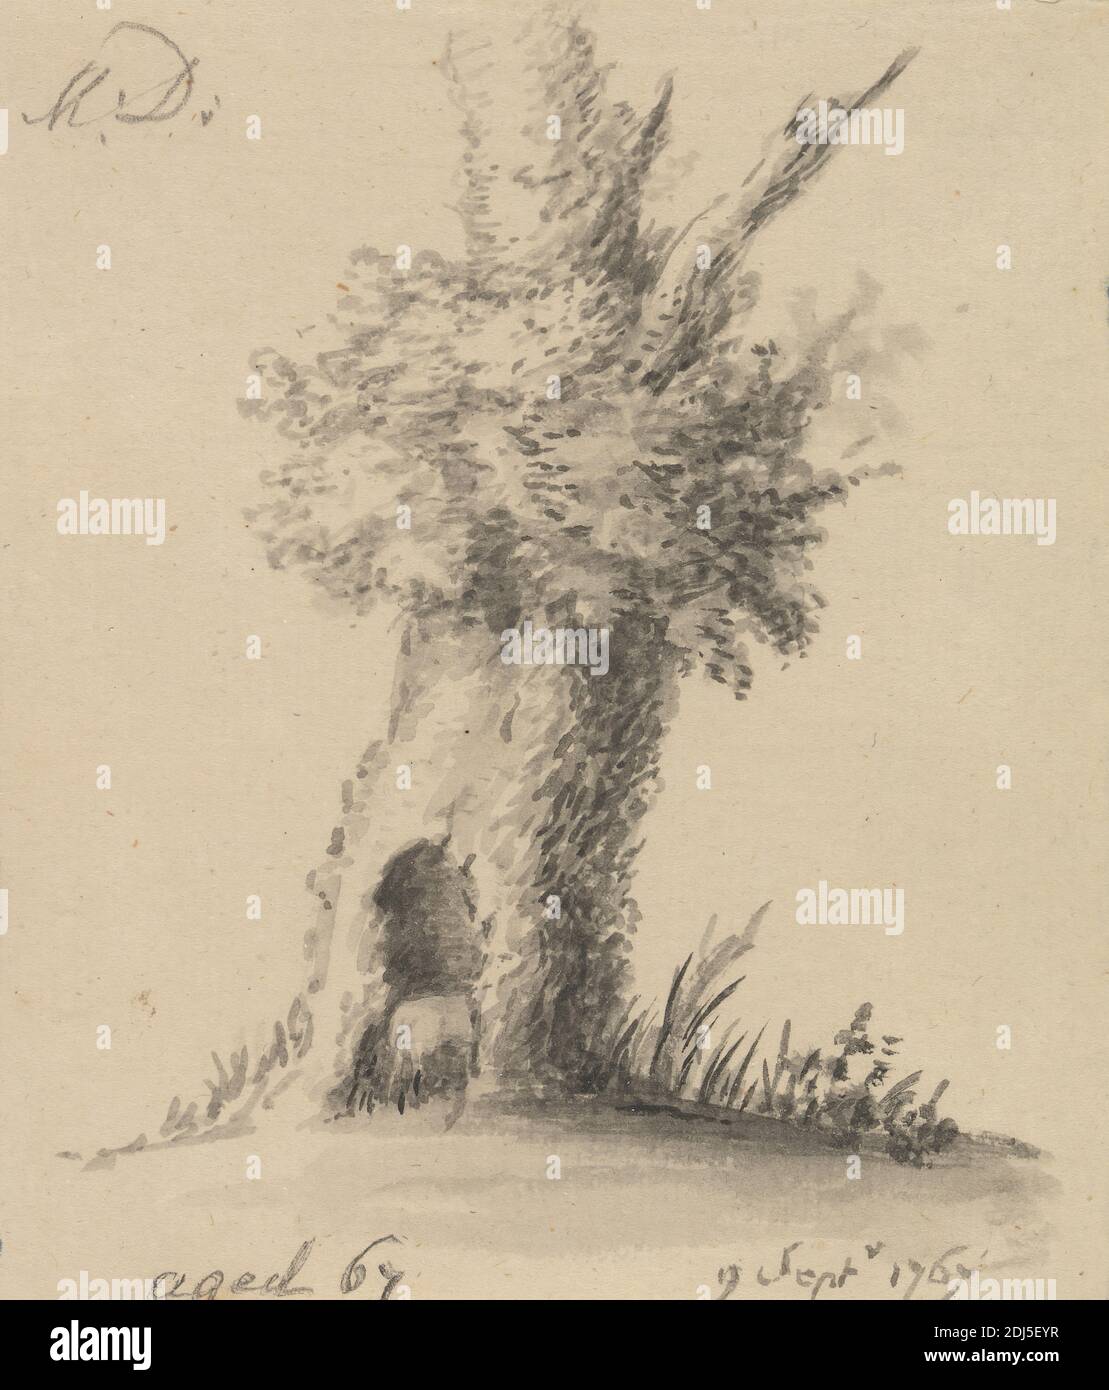 Hollow Tree, Mary Delany, 1700–1788, British, 1767, Gray wash with pen and black ink on medium, cream, slightly textured laid paper, Sheet: 4 7/16 x 3 3/4 inches (11.2 x 9.5 cm), botanical subject, hollow, still life, tree Stock Photo